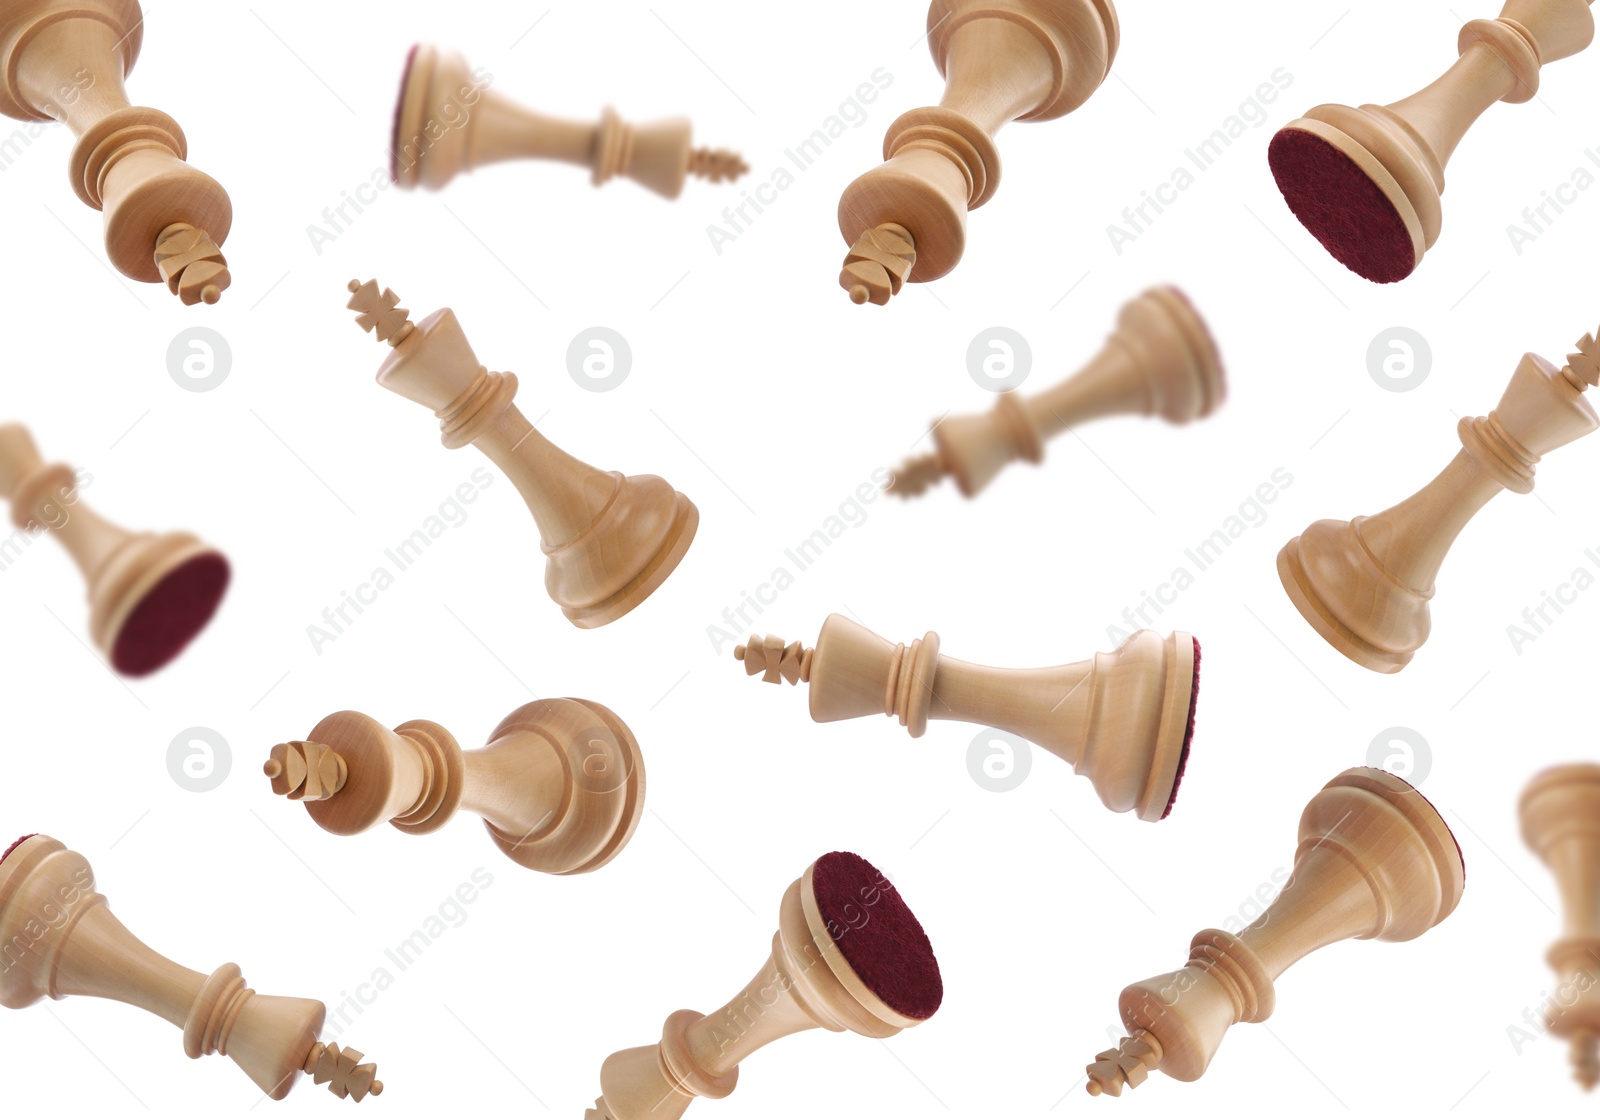 Image of Wooden chess kings falling on white background